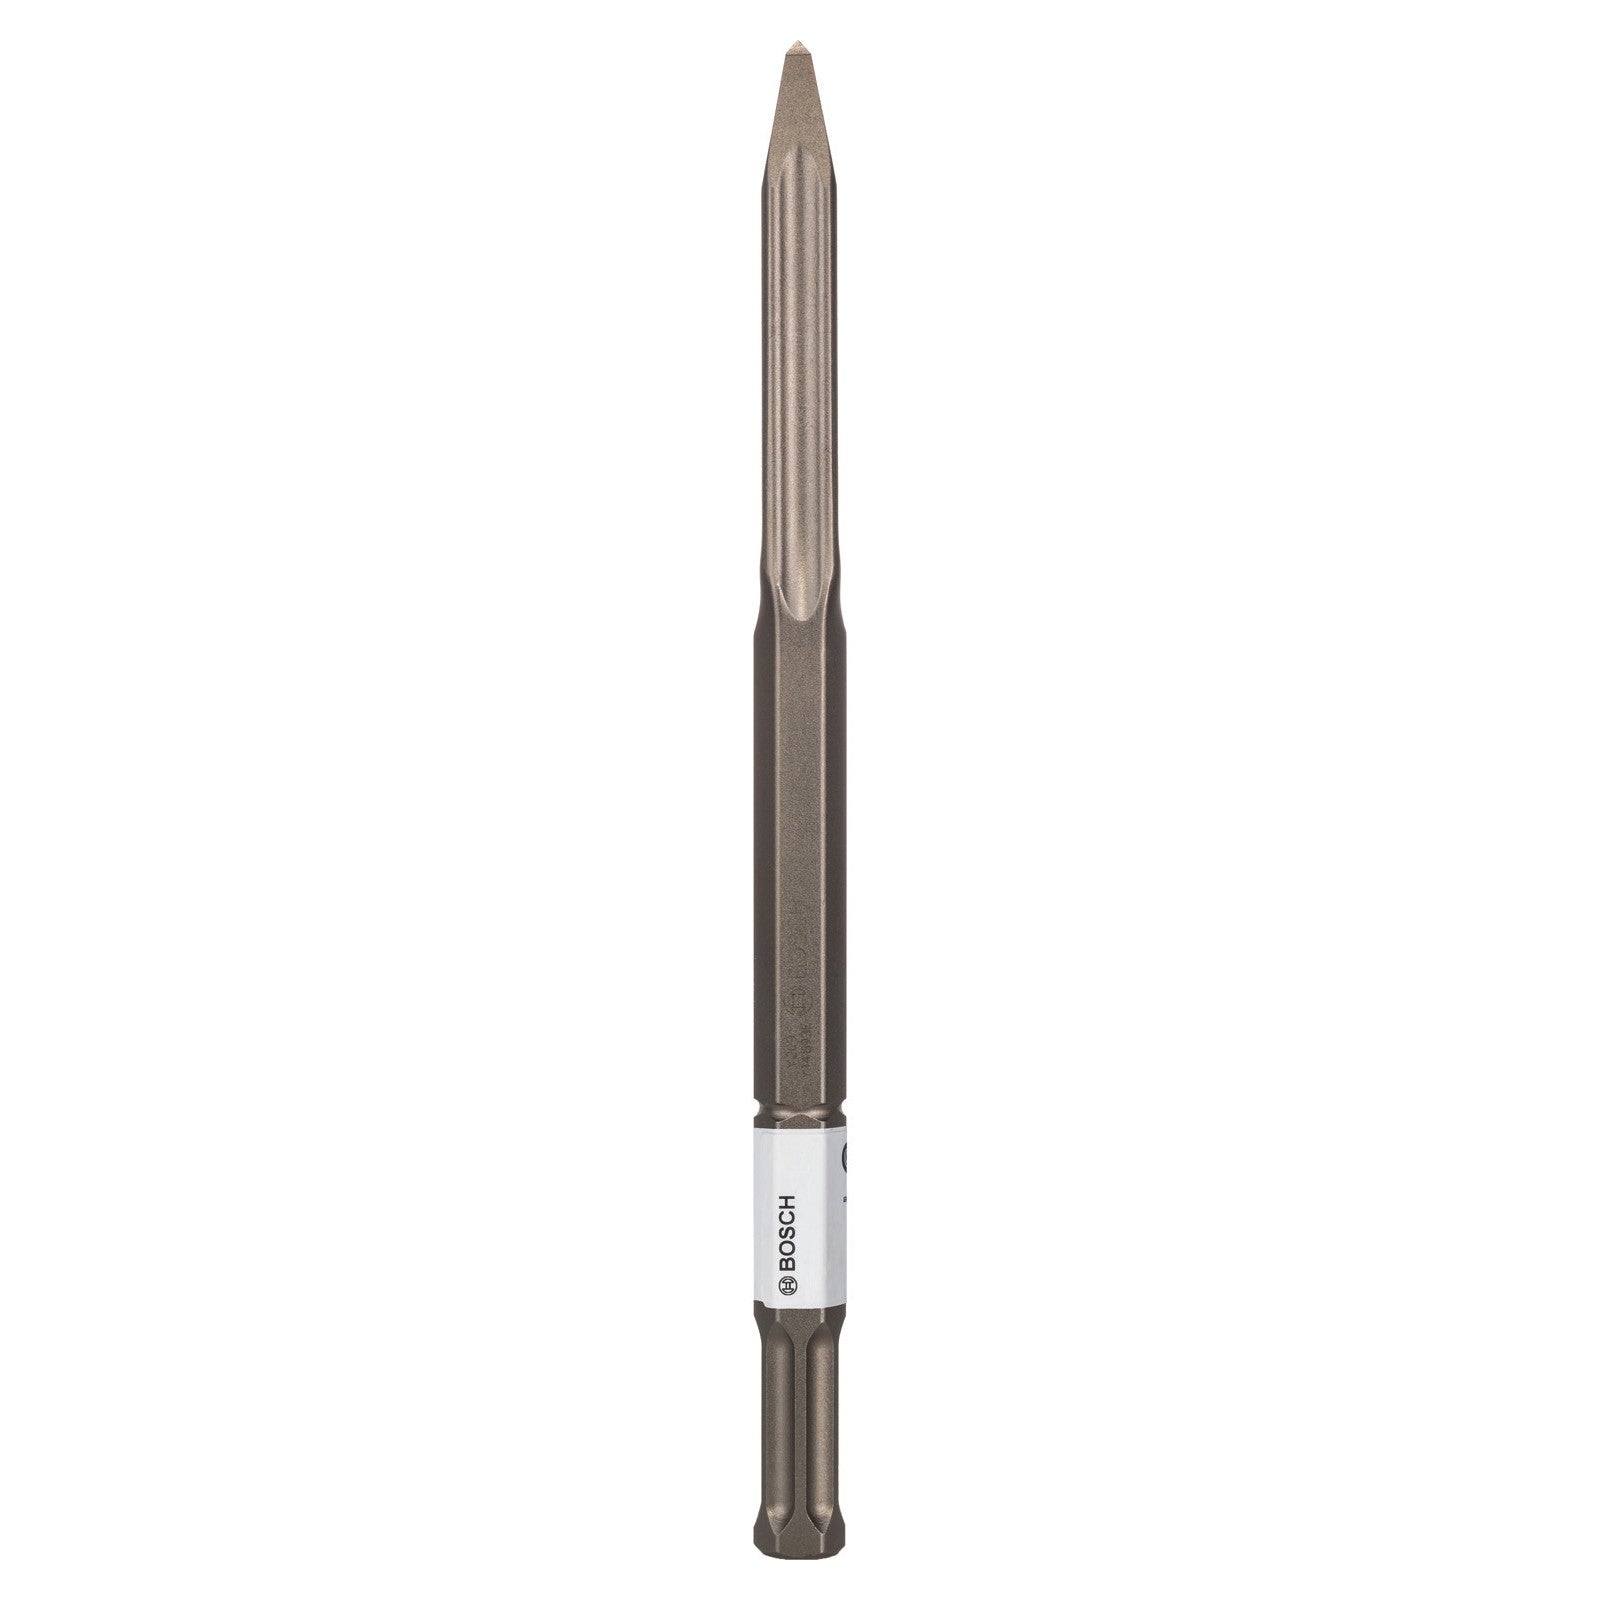 Bosch Pointed Chisel 28mm Hex Shank 520mm Length - Power Tool Services